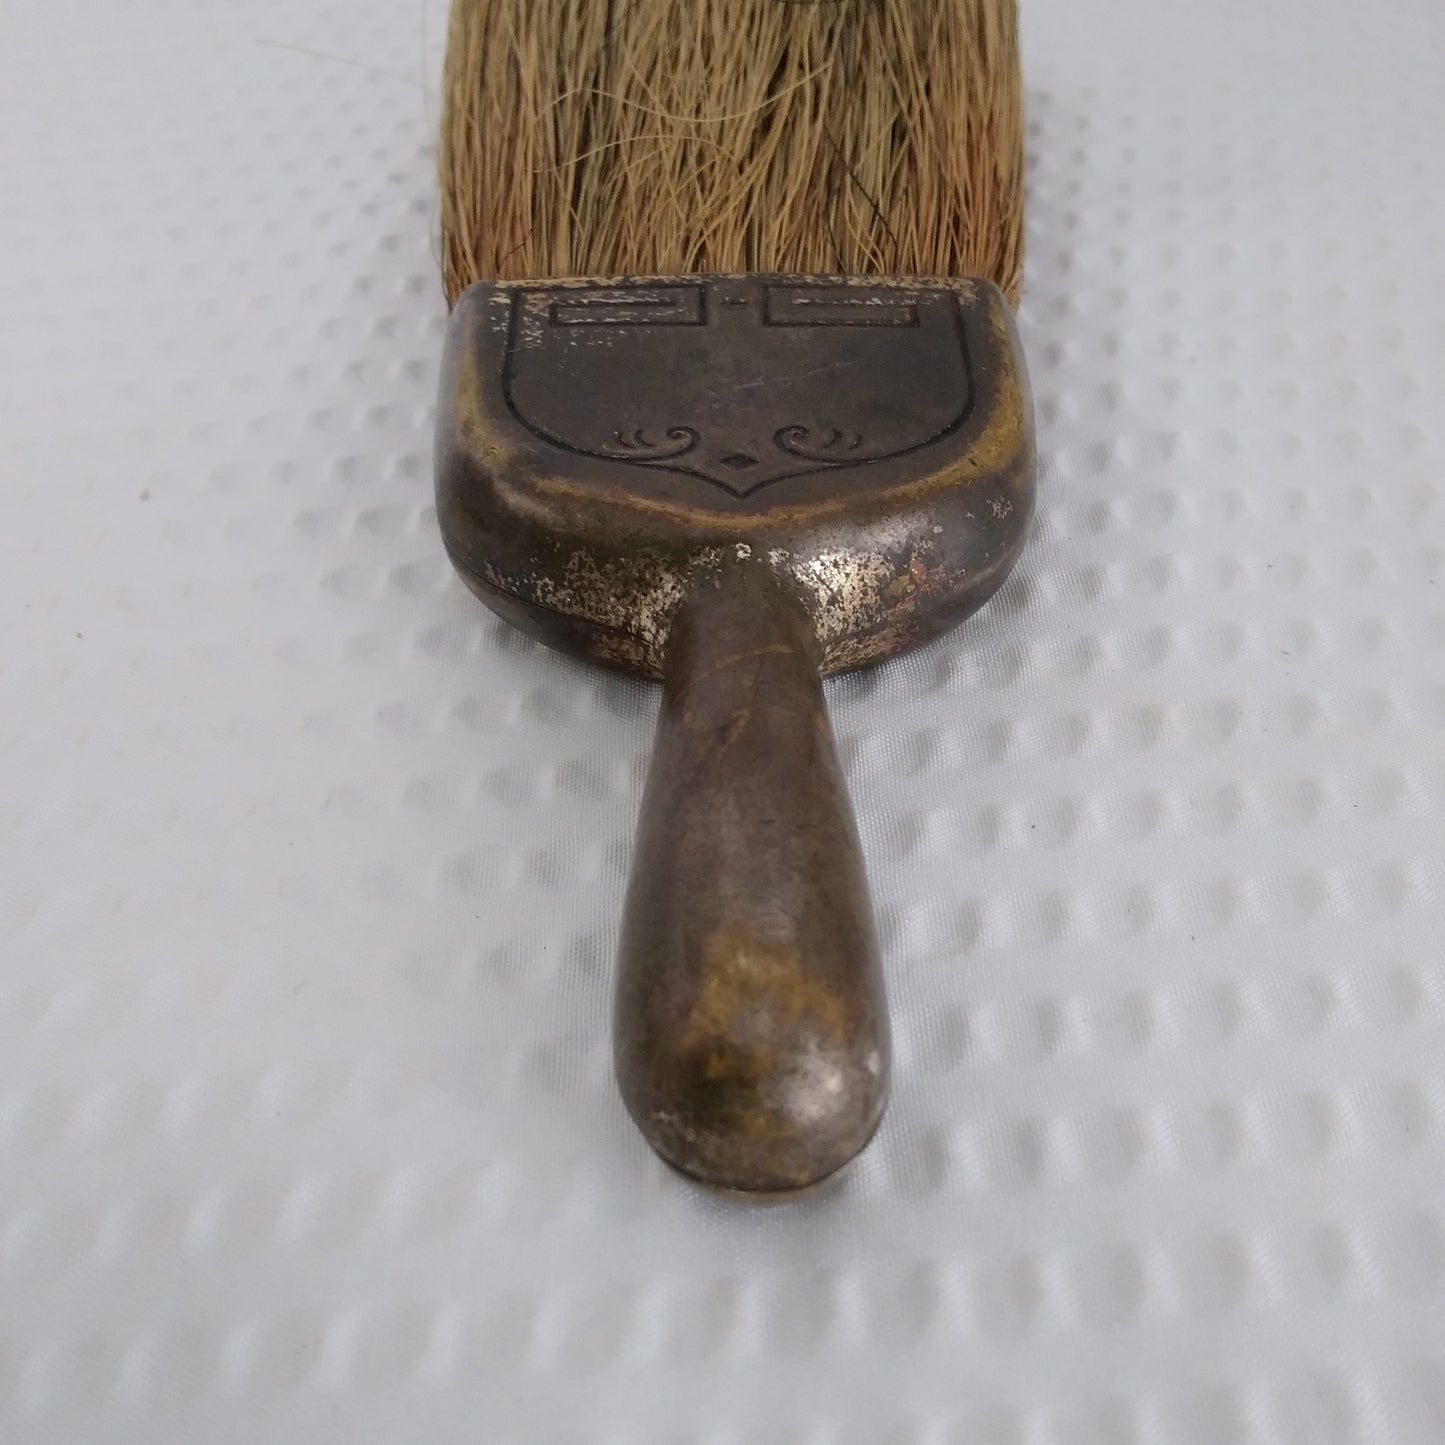 Vintage Pocket/Barber Brush with Metal Handle and Leather Case